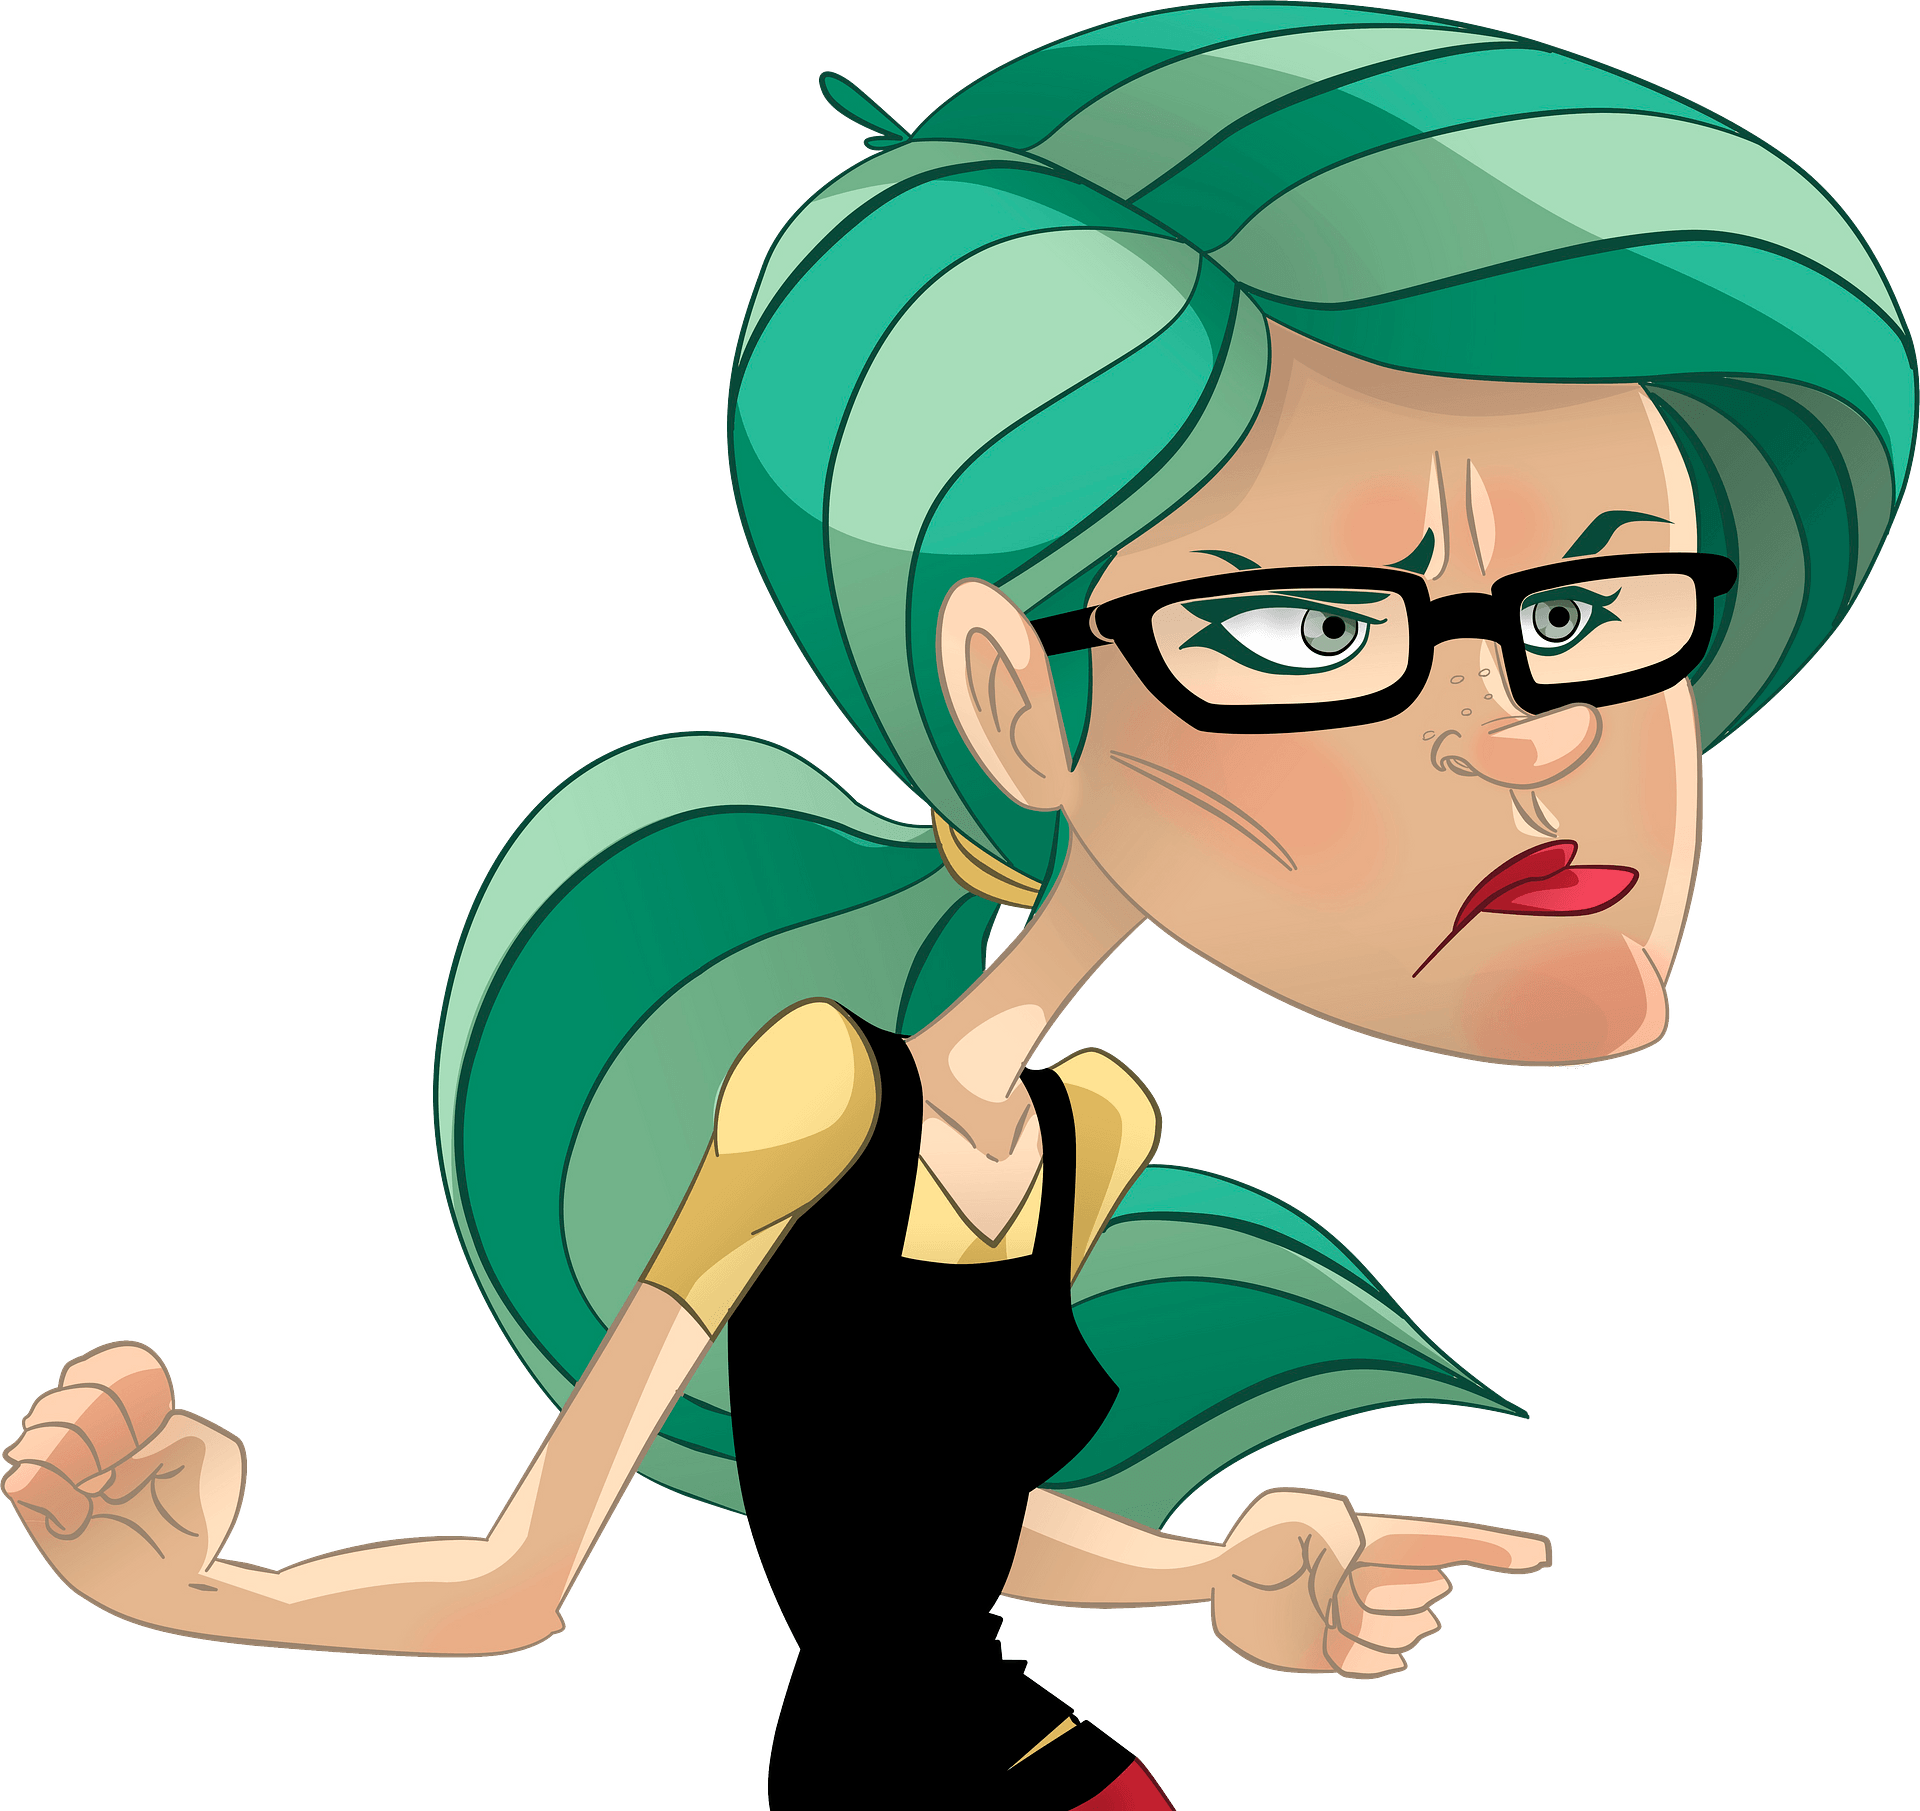 Angry Woman Royalty Free Svg Cliparts Vectors And Stock Clip Art Library